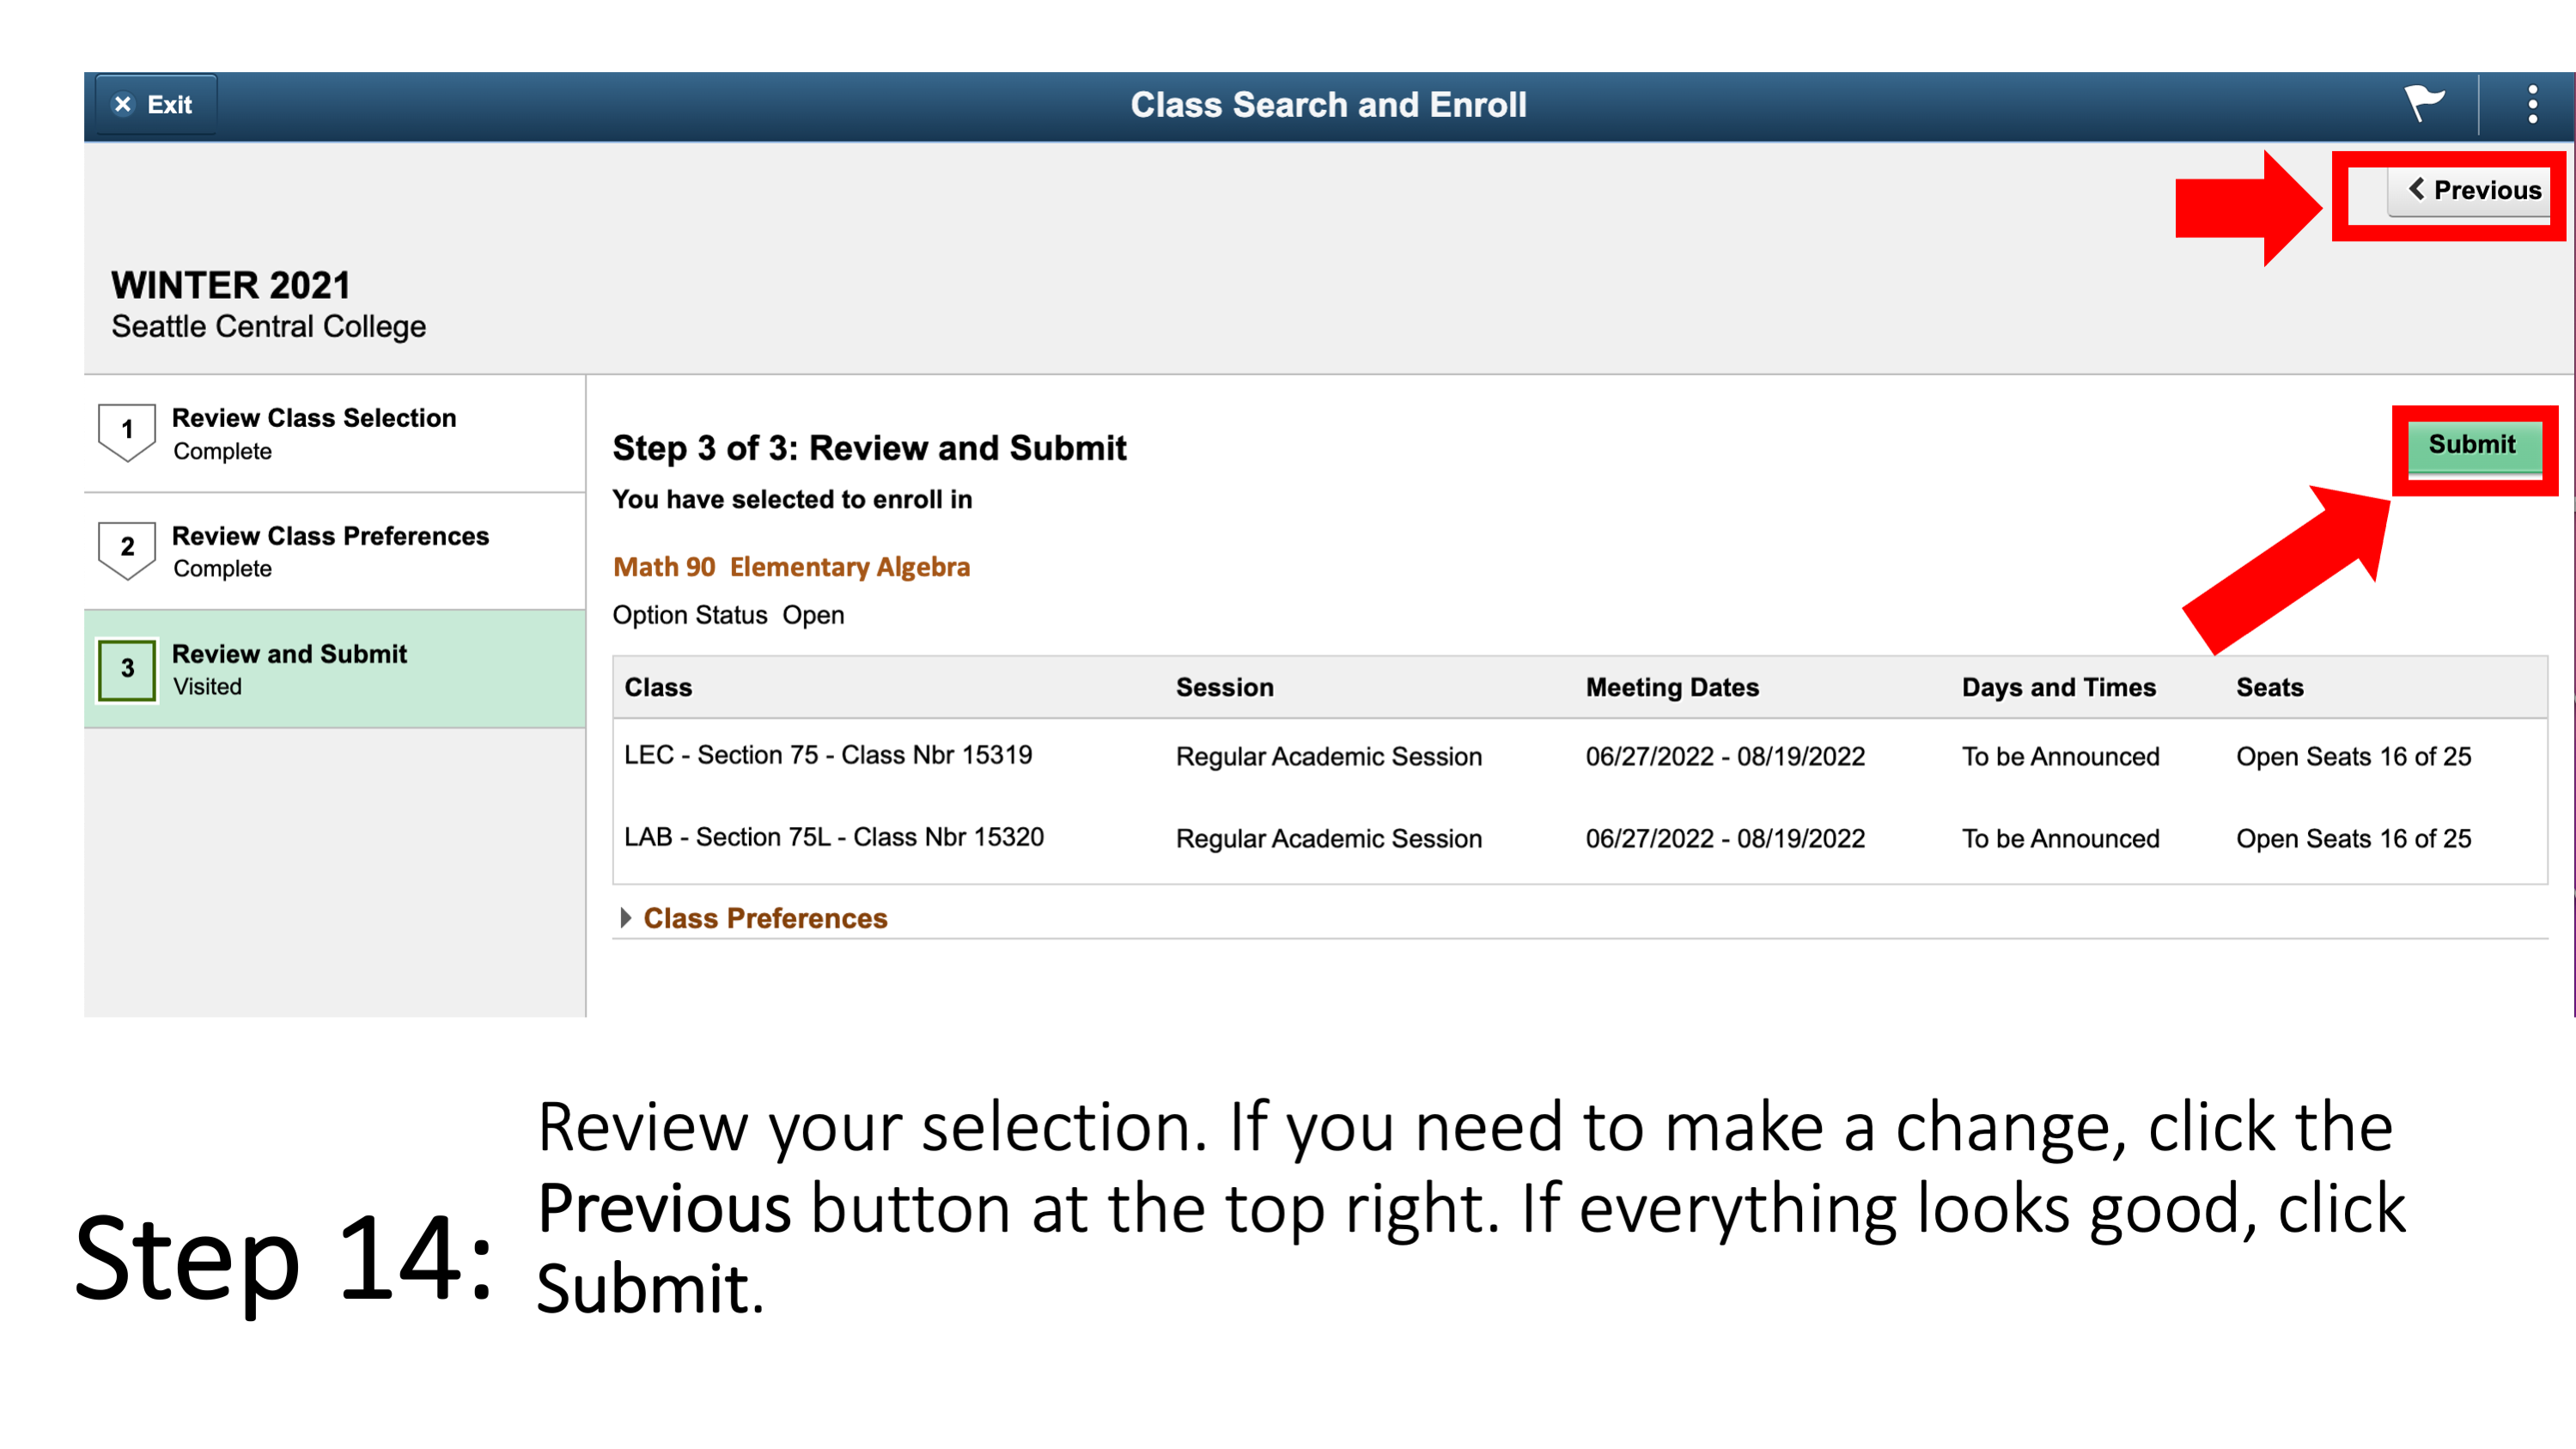 Step 14: Review your selection. If you need to make a change, click the Previous button at the top right. If everything looks good, click Submit. 